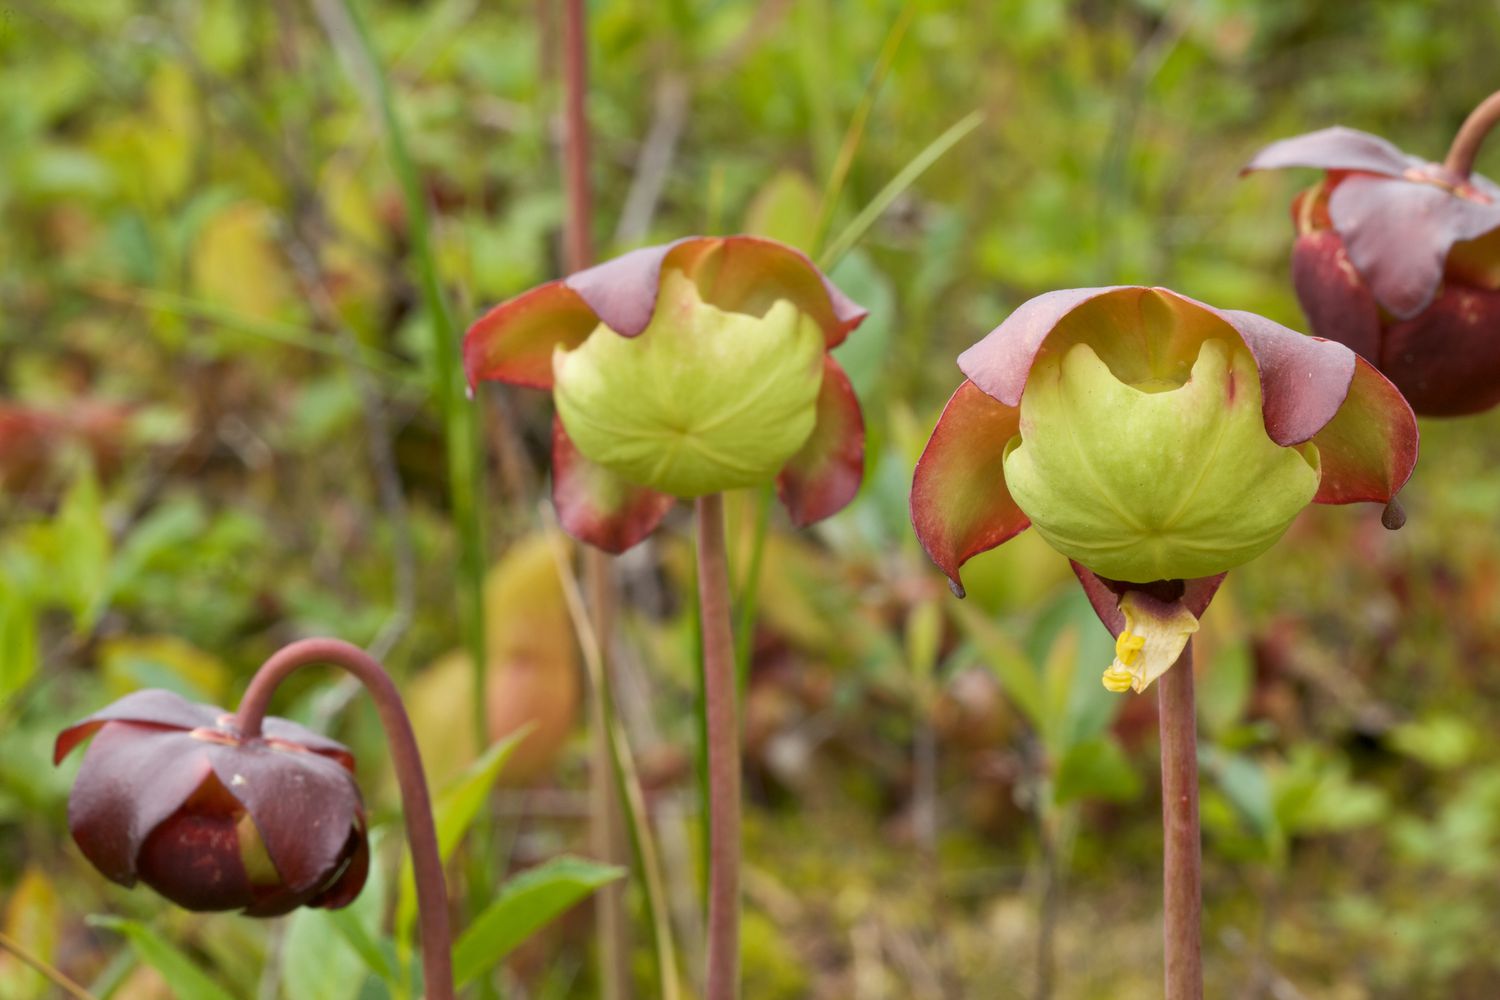 Northern pitcher plant flowers.